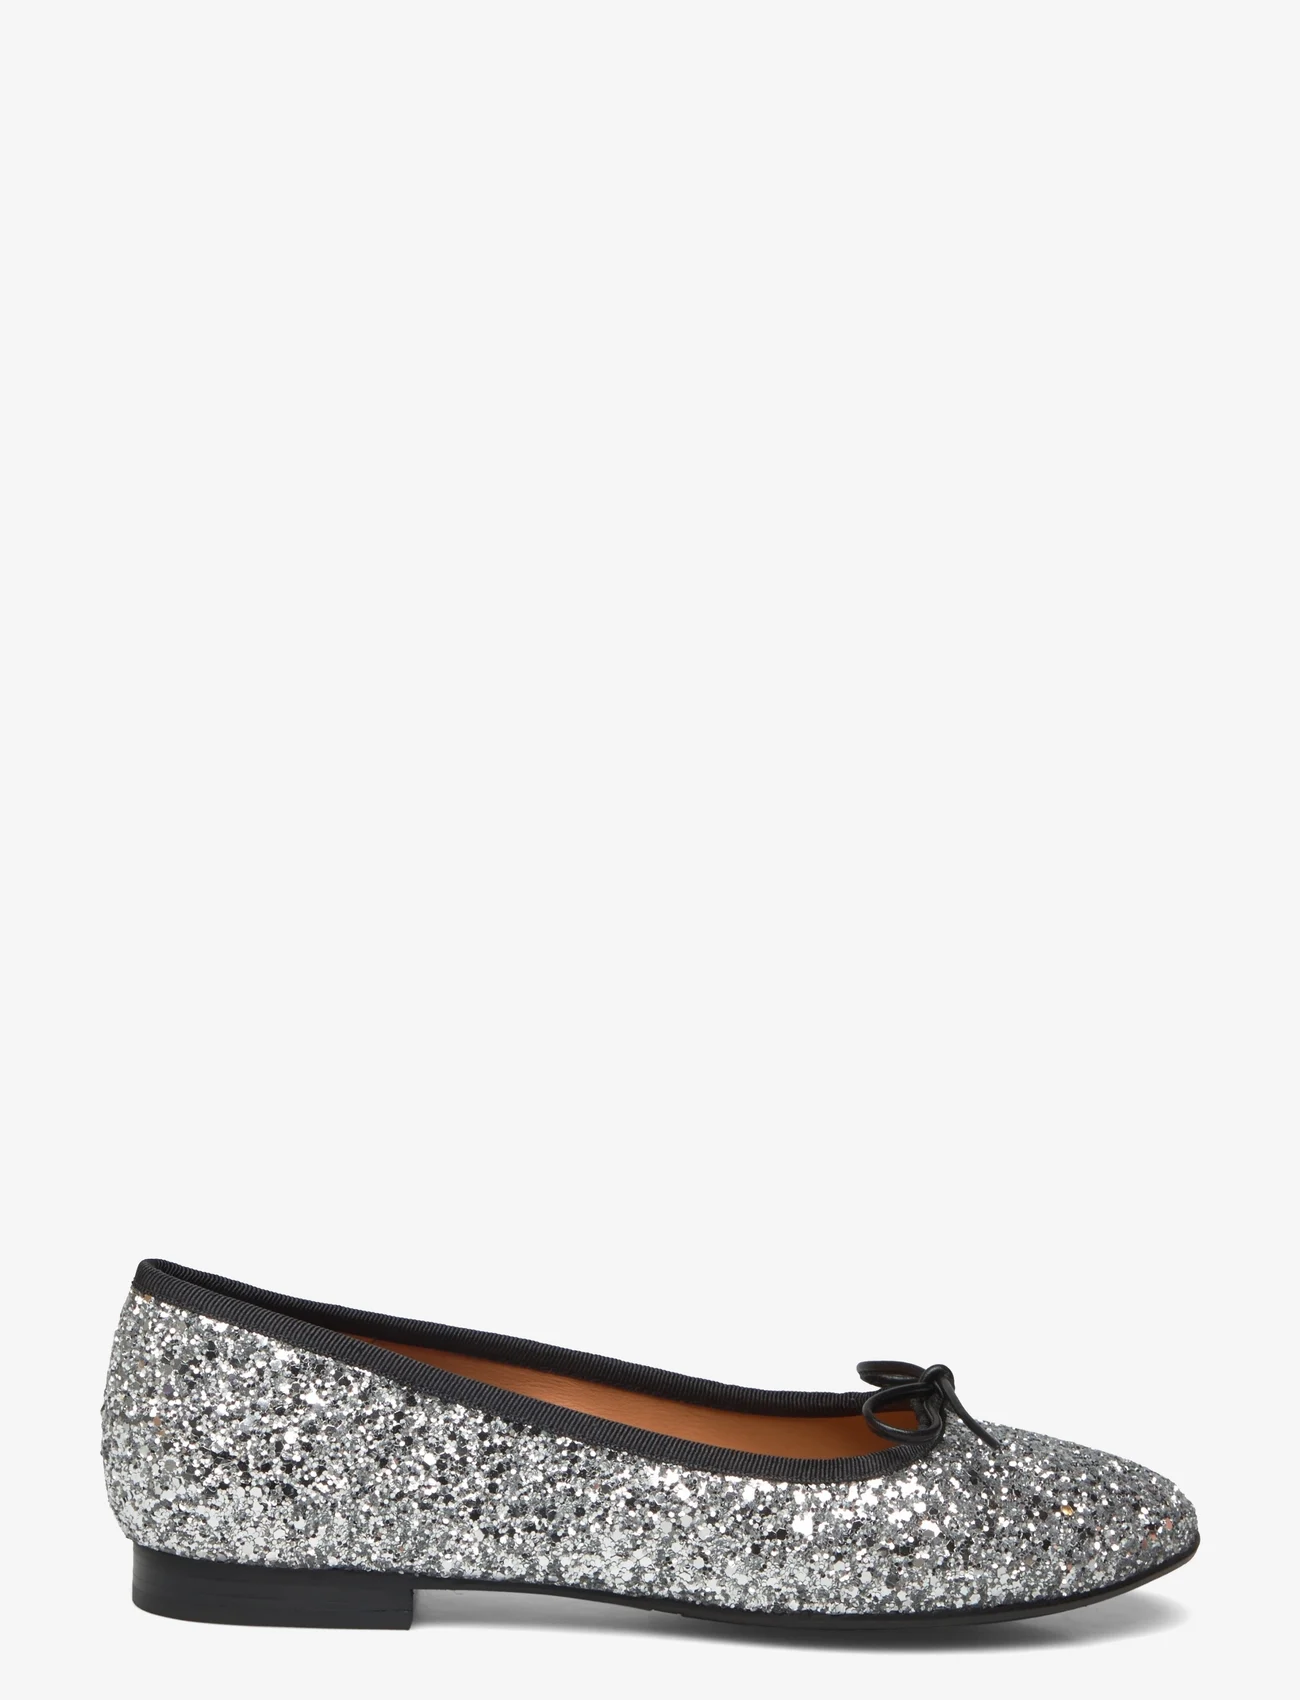 Billi Bi - Ballerina - party wear at outlet prices - silver glitter - 1